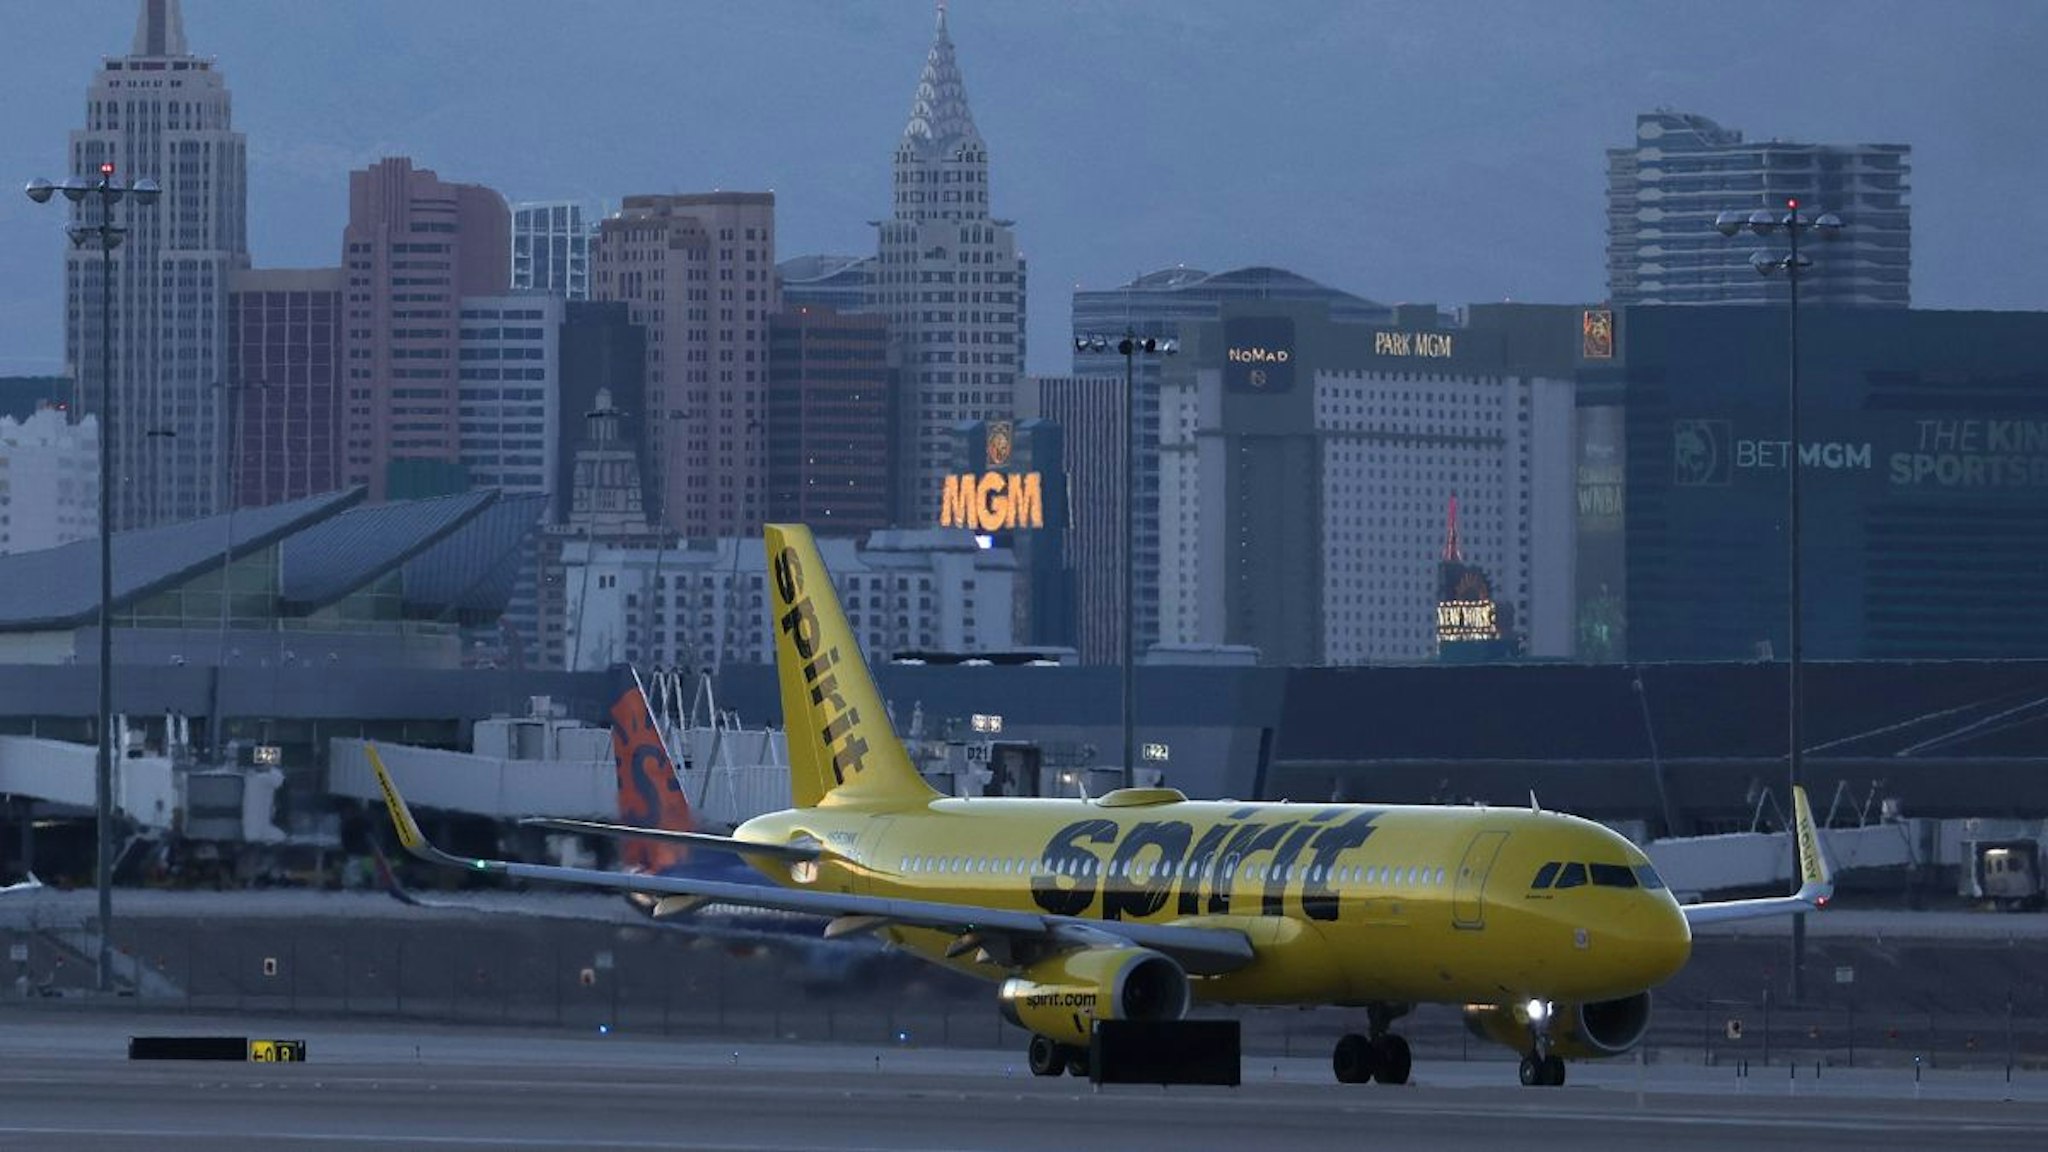 A Spirit Airlines plane taxis at Harry Reid International Airport on October 14, 2022 in Las Vegas, Nevada.